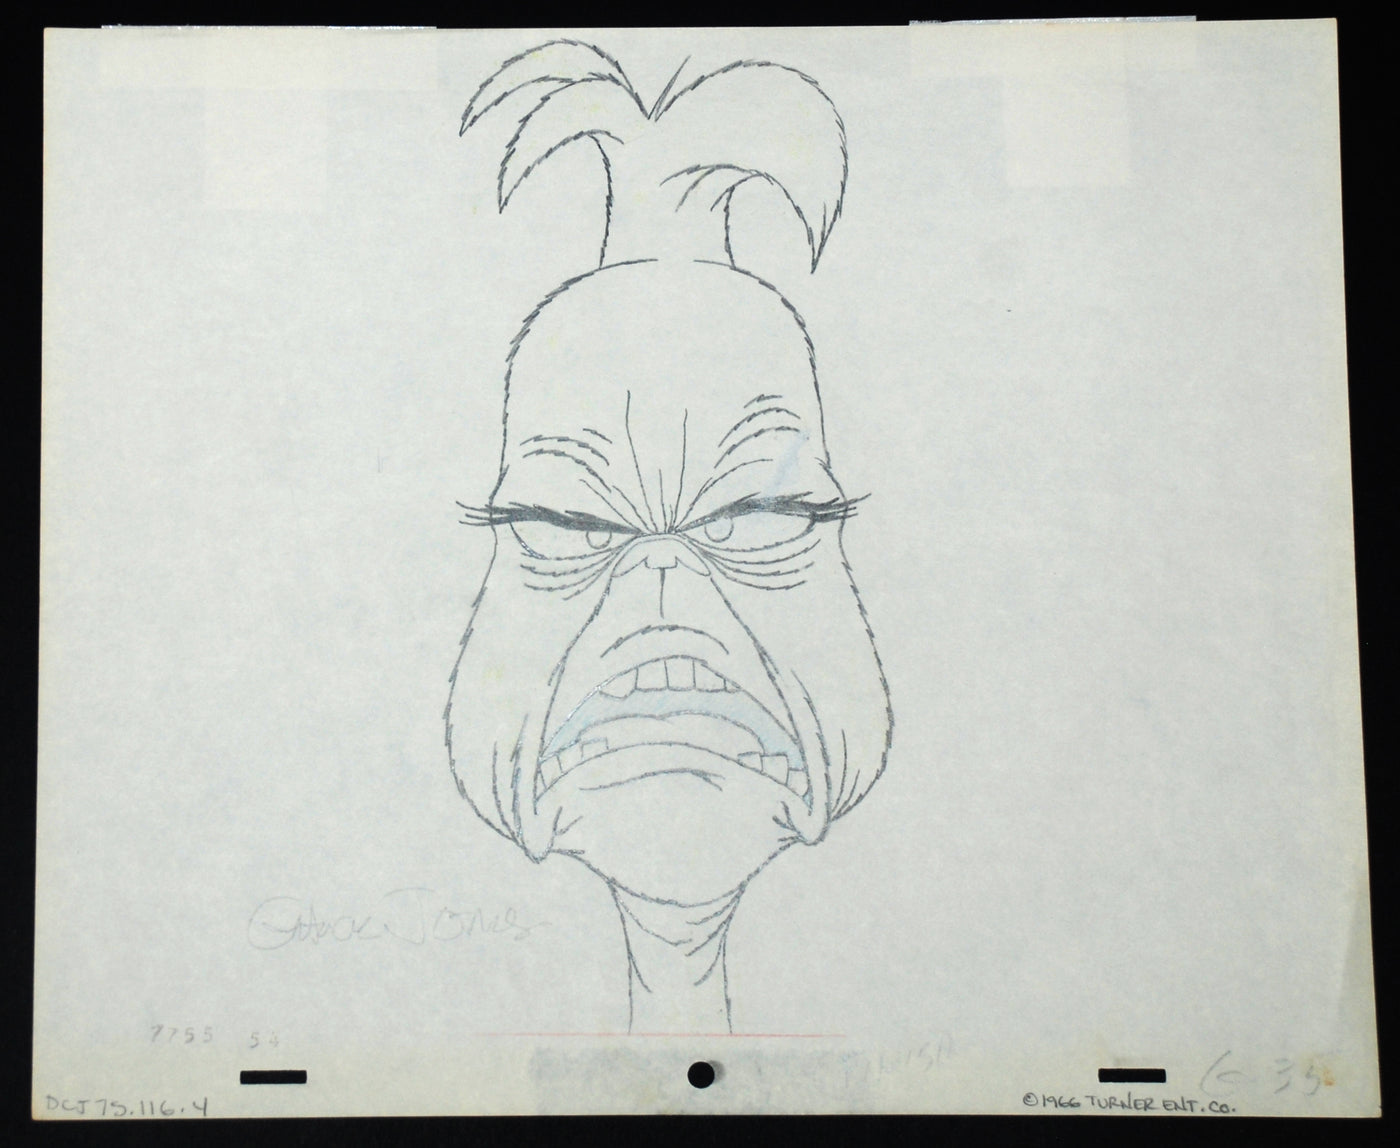 Original Chuck Jones Production Drawing of The Grinch from How the Grinch Stole Christmas